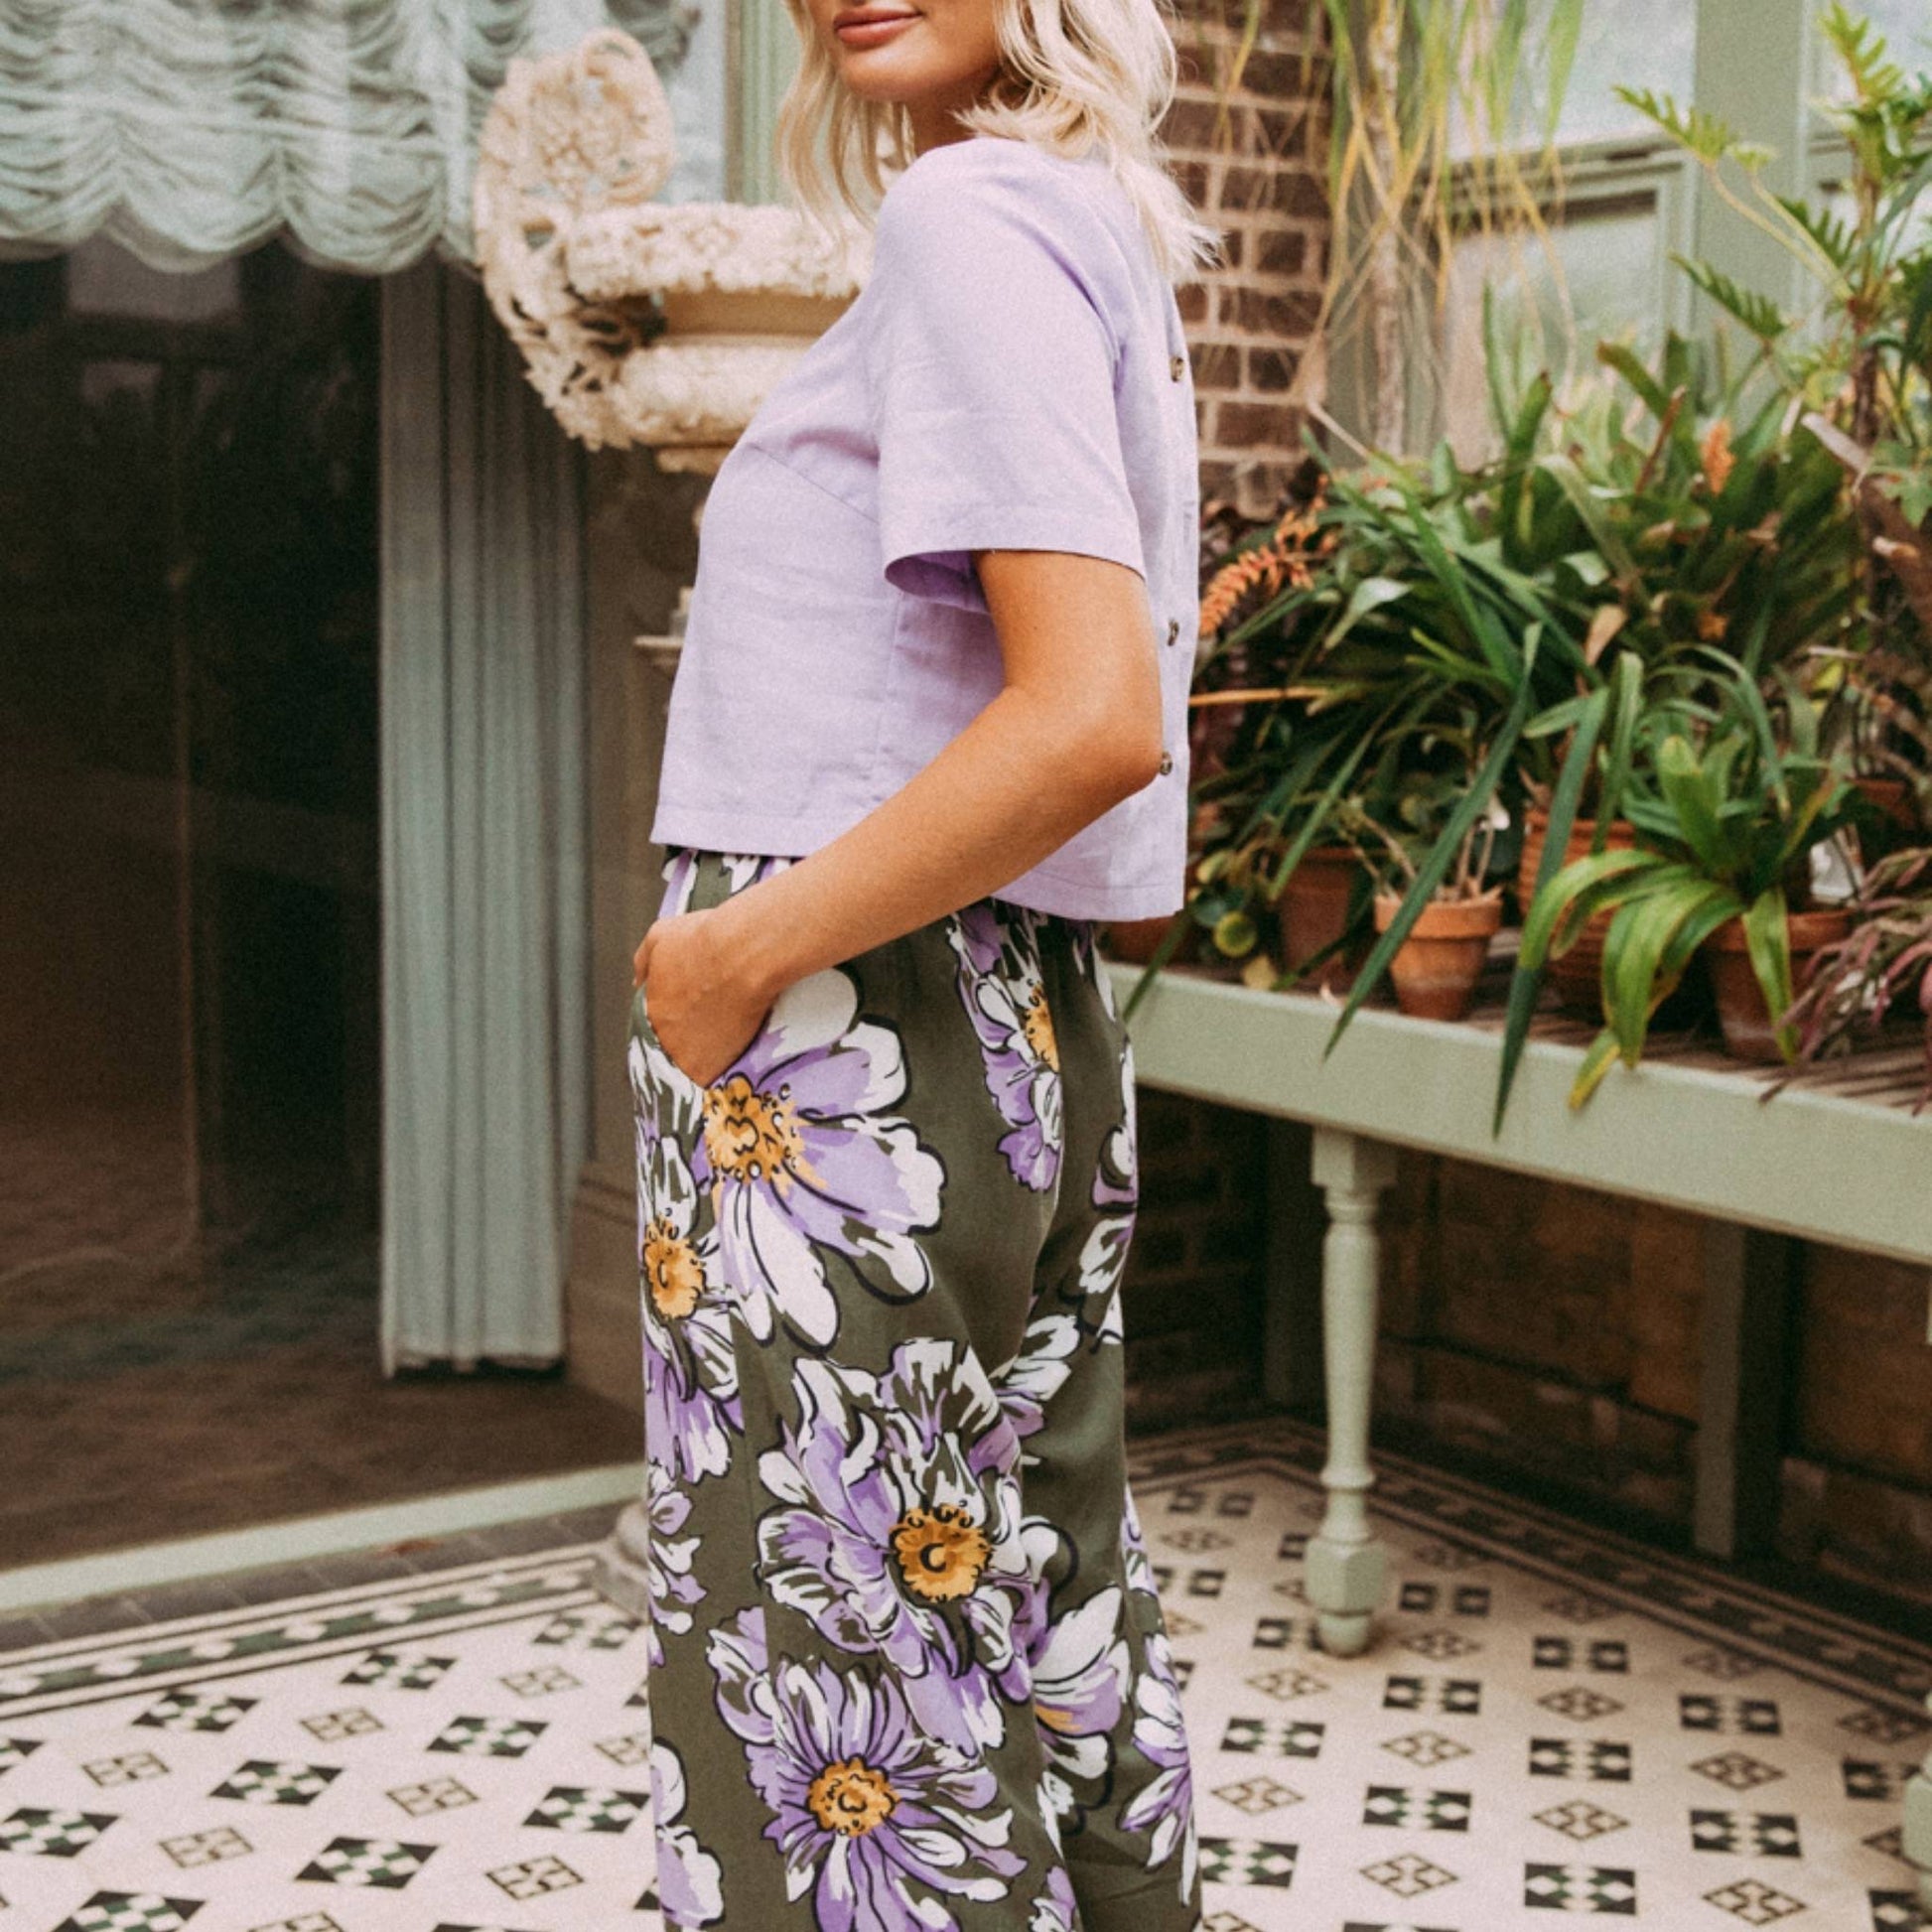 Made from flattering and drapey linen lyocell the Antheia Floral Wide Leg Pant from Elm pants are the ideal seasonal addition to your wardrobe. These wide leg pants have a green base with lilac petaled watercolour flowers. The pants have pockets and a drawstring paperbag waist